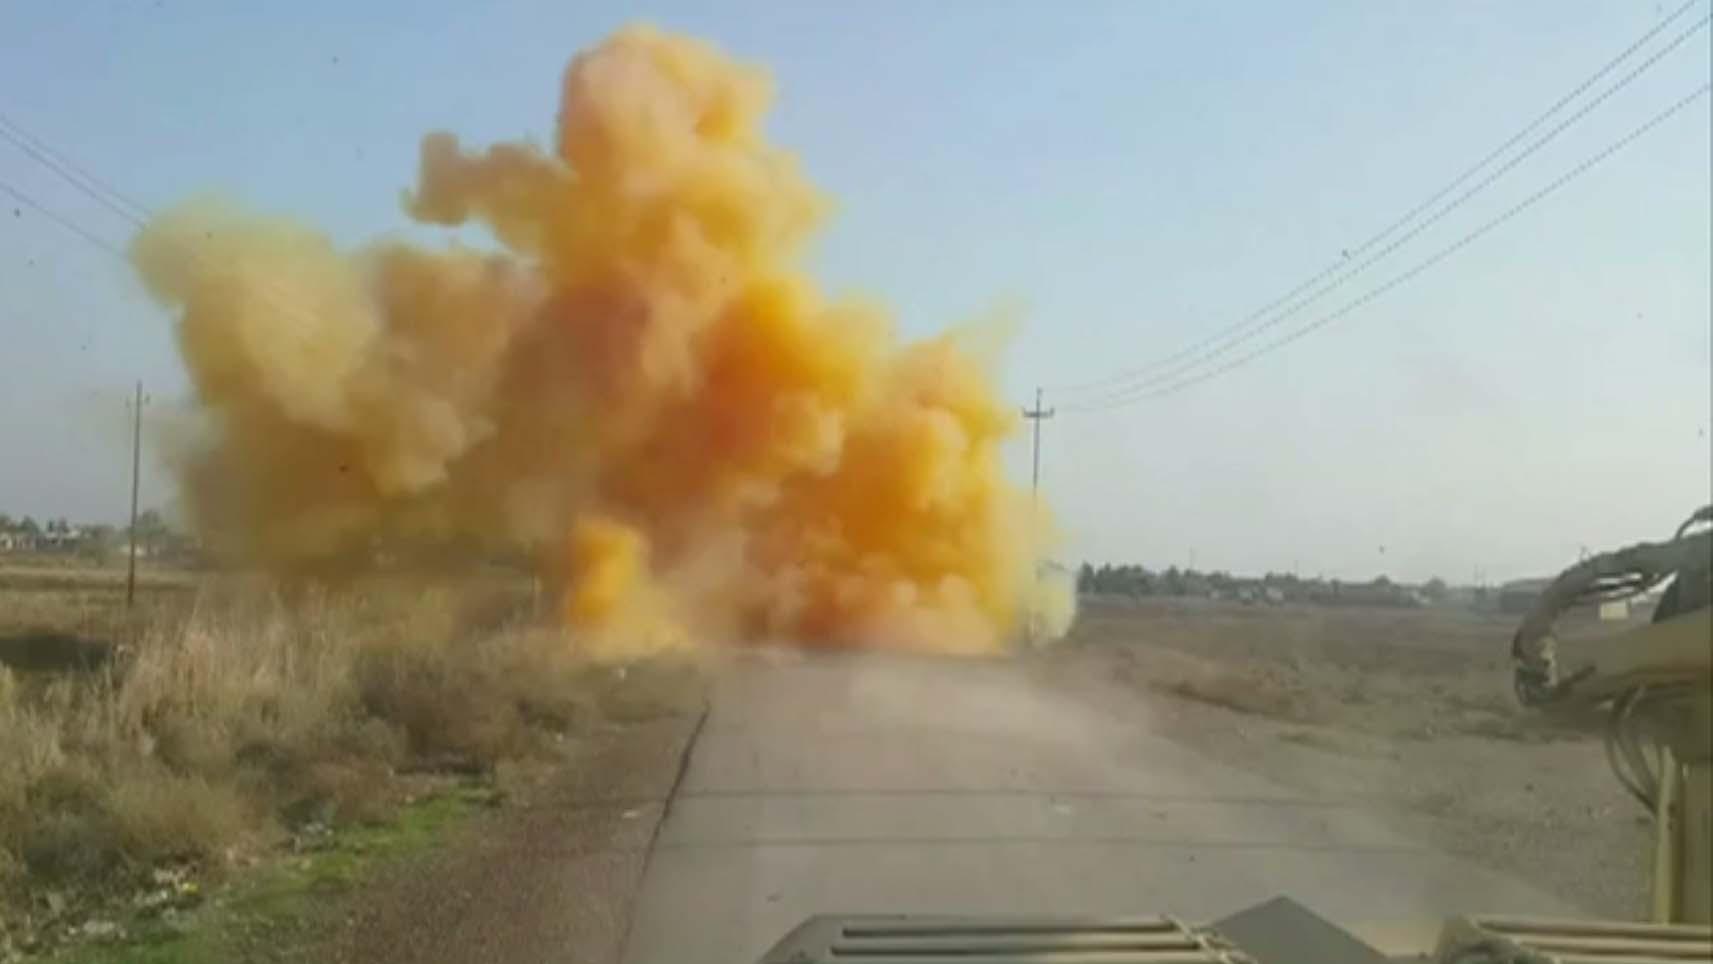 The Iraqi army destroys what it says is an IED planted by ISIS containing chlorine gas in March 2015.